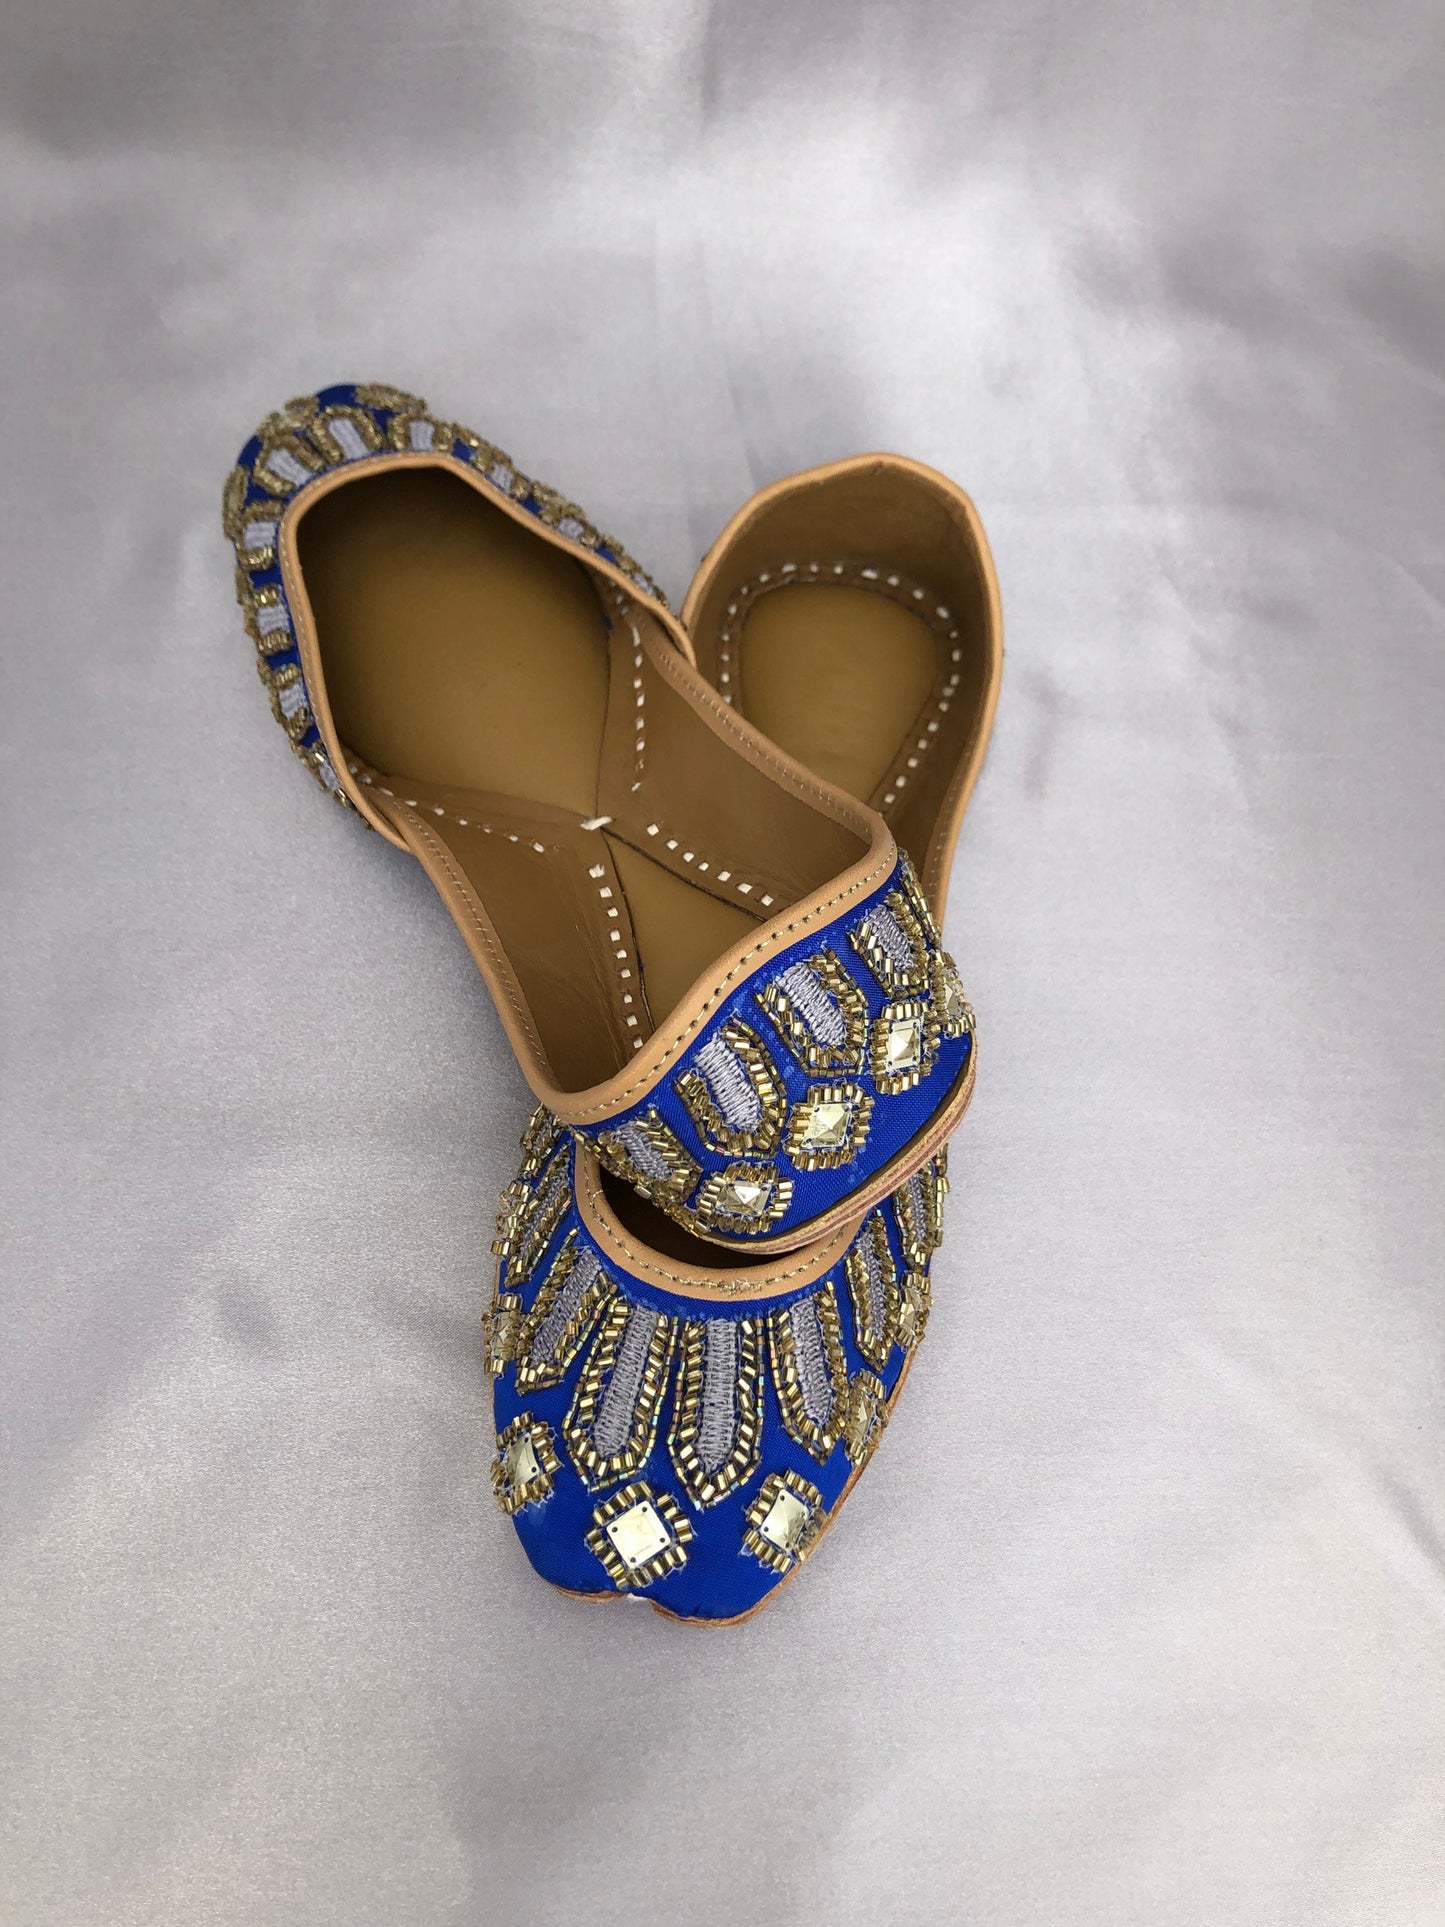 Blue Punjabi Jutti / Jooti with Pearls and Crystals Bride’s Wedding Shoes Various Sizes Available US 6/7/8. UK 4/5/6